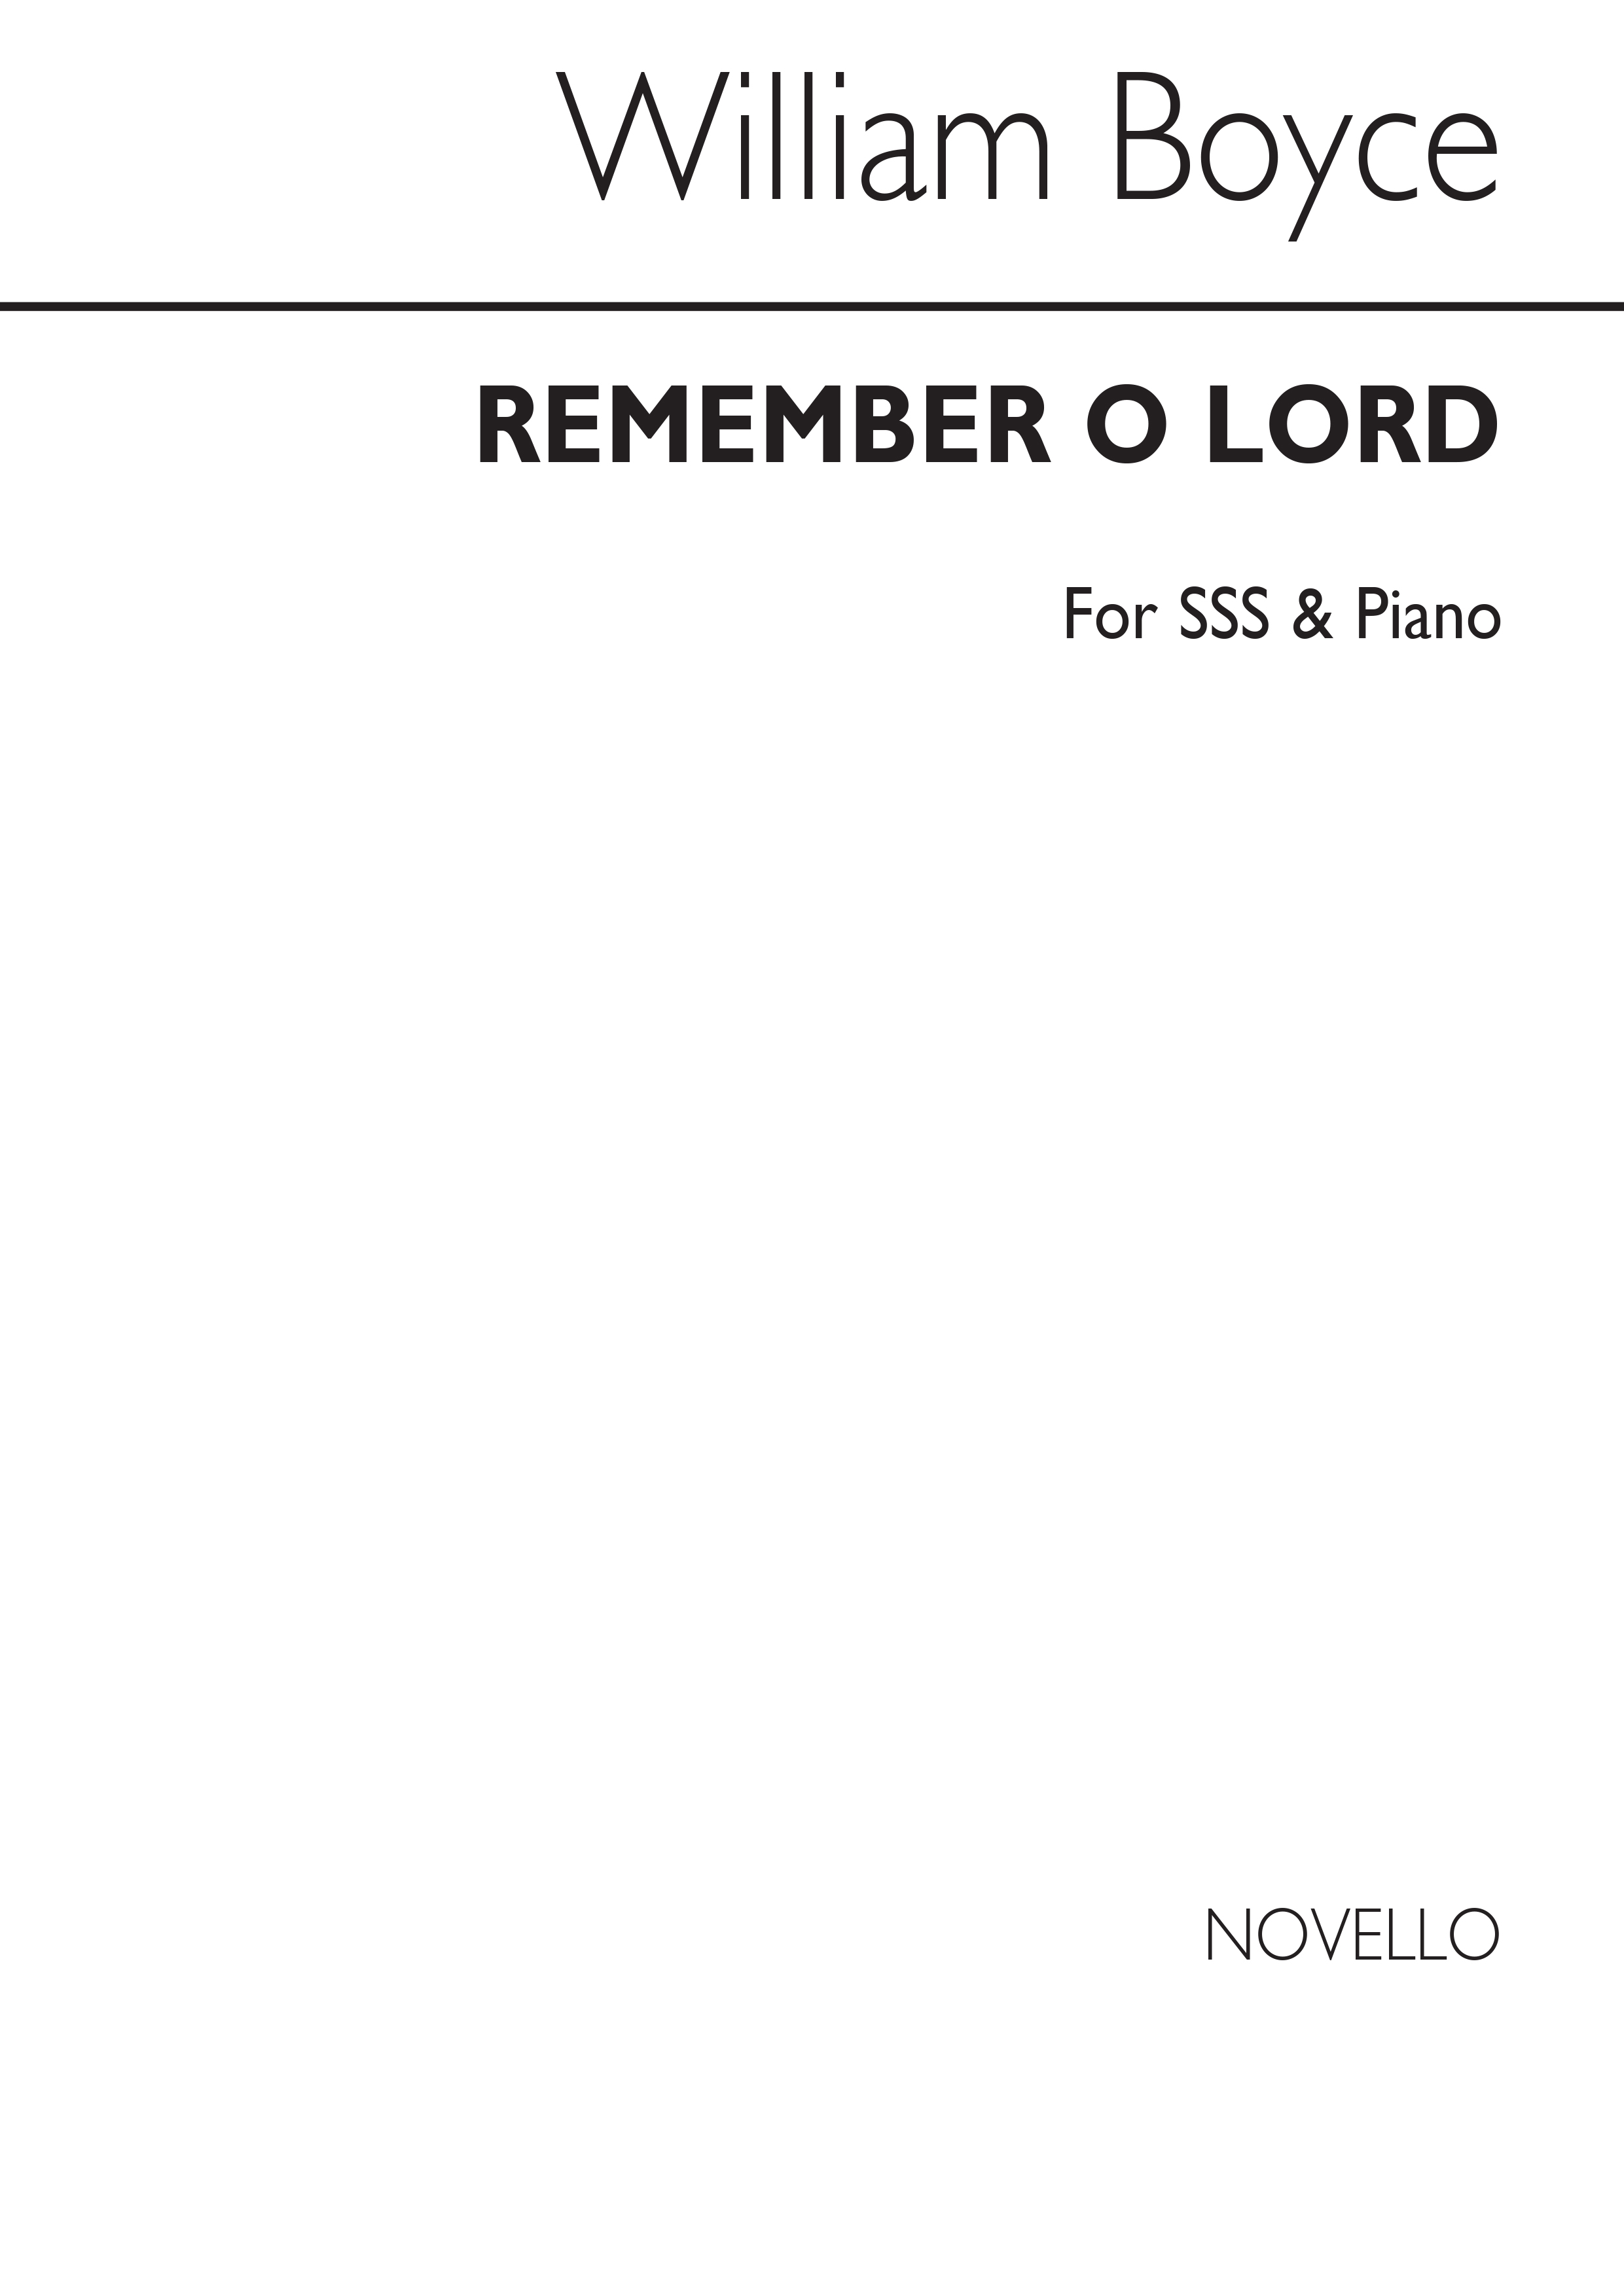 William Boyce: Remember, O Lord Sss/Piano